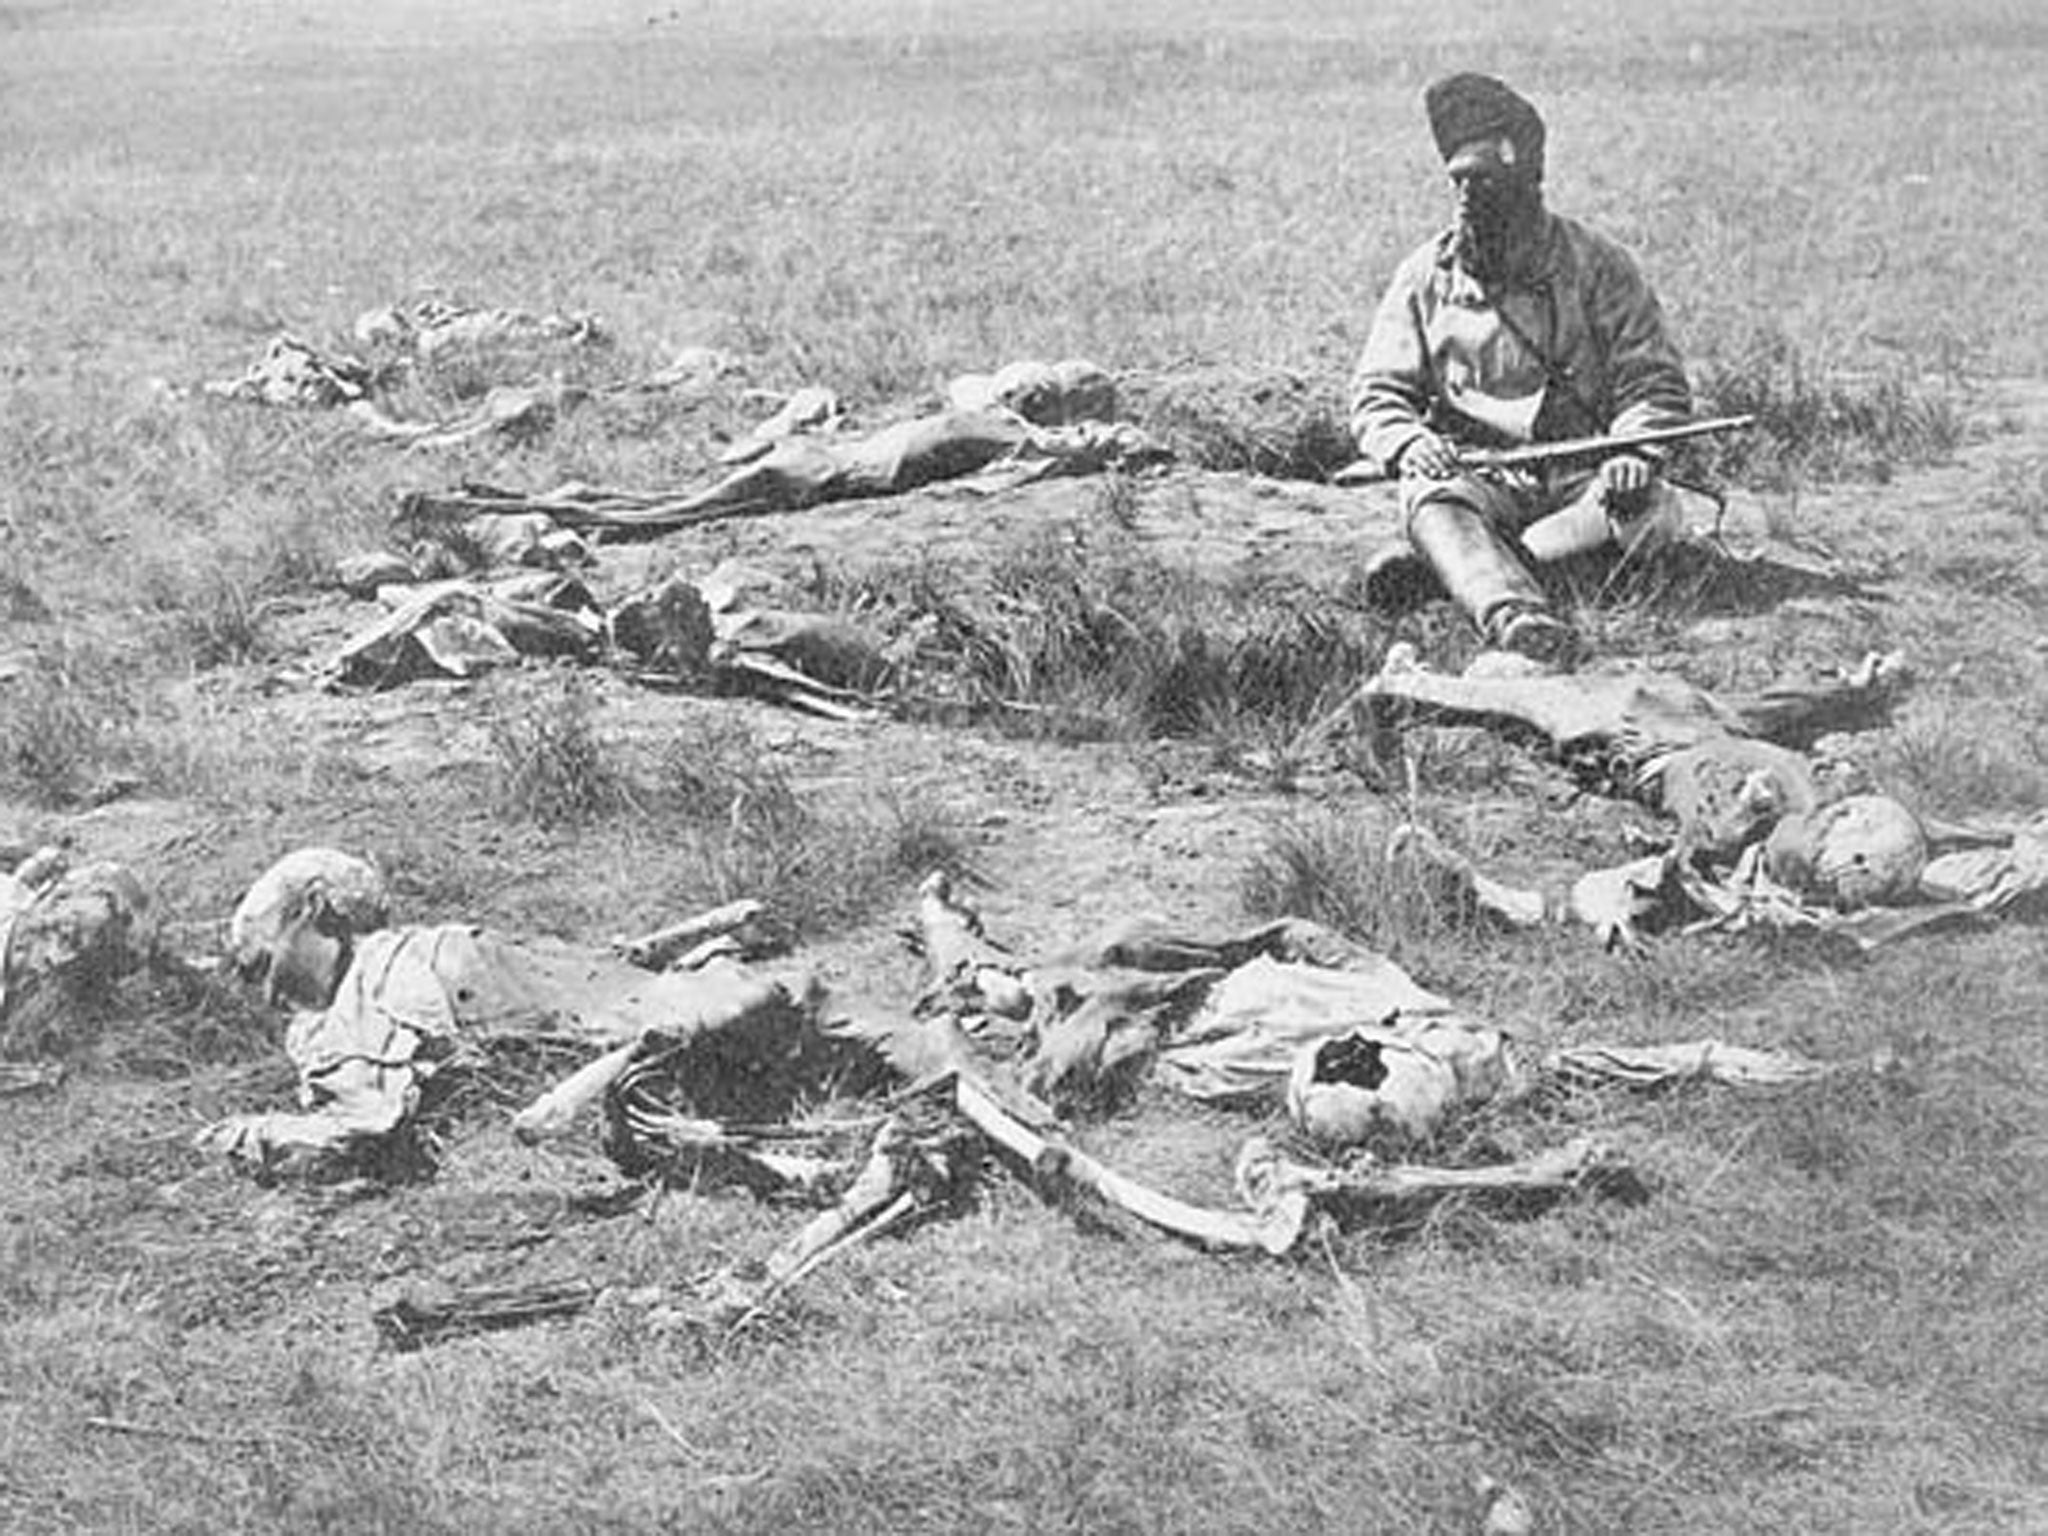 A group of Crow Indians, who were killed and scalped in 1874